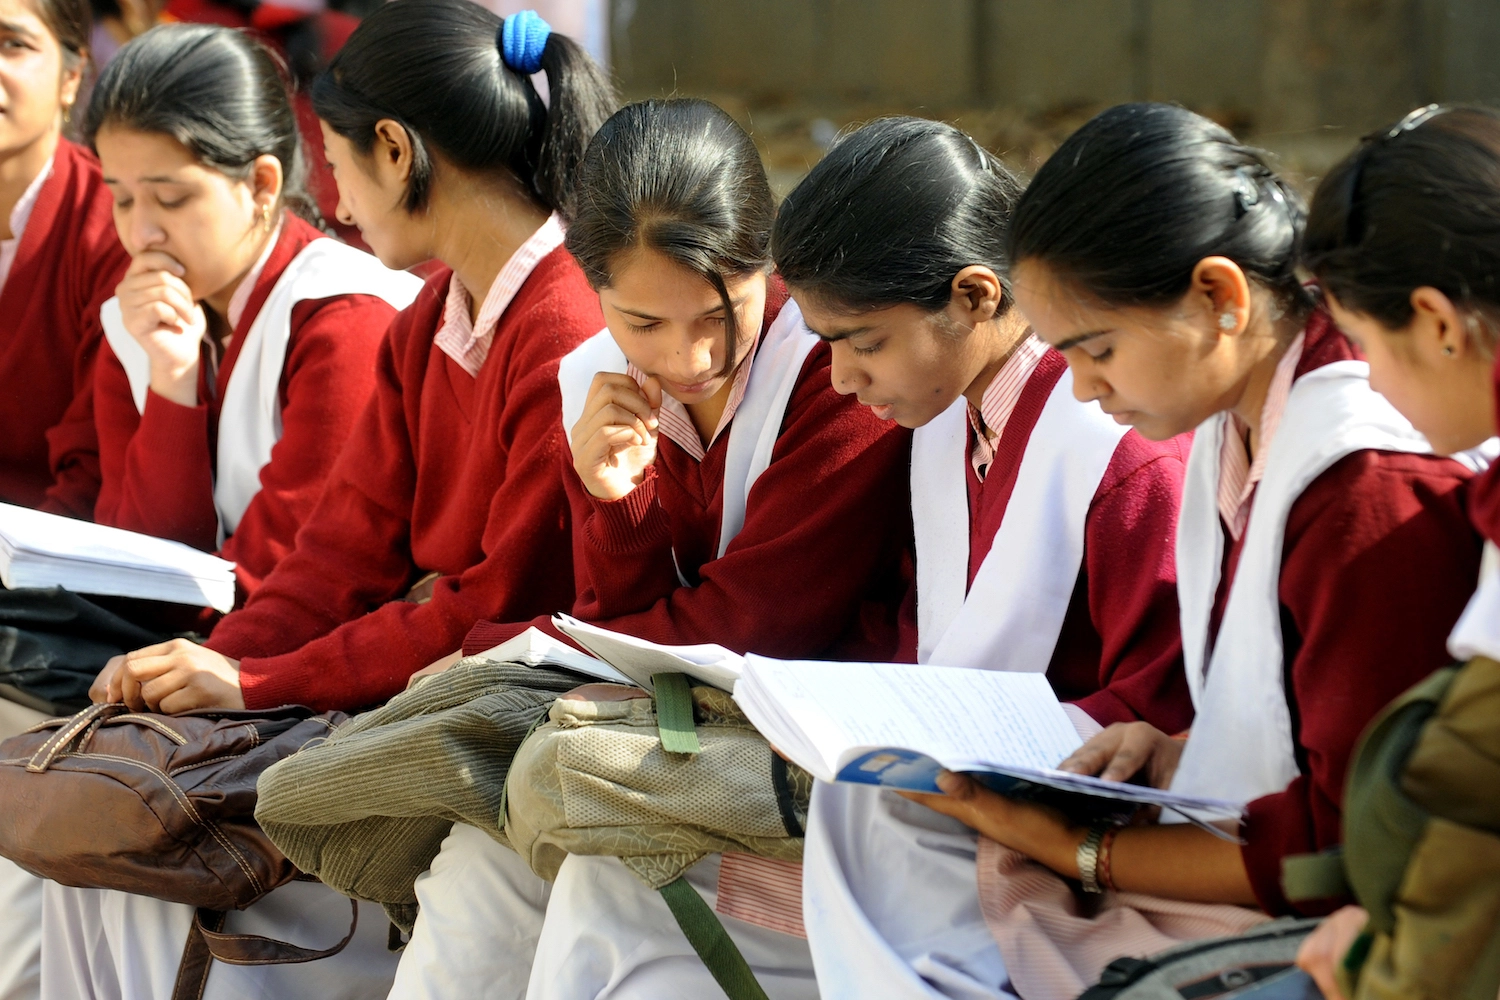 REVISION OF CBSE SYLLABUS: AN INDOCTRINATION DRIVE